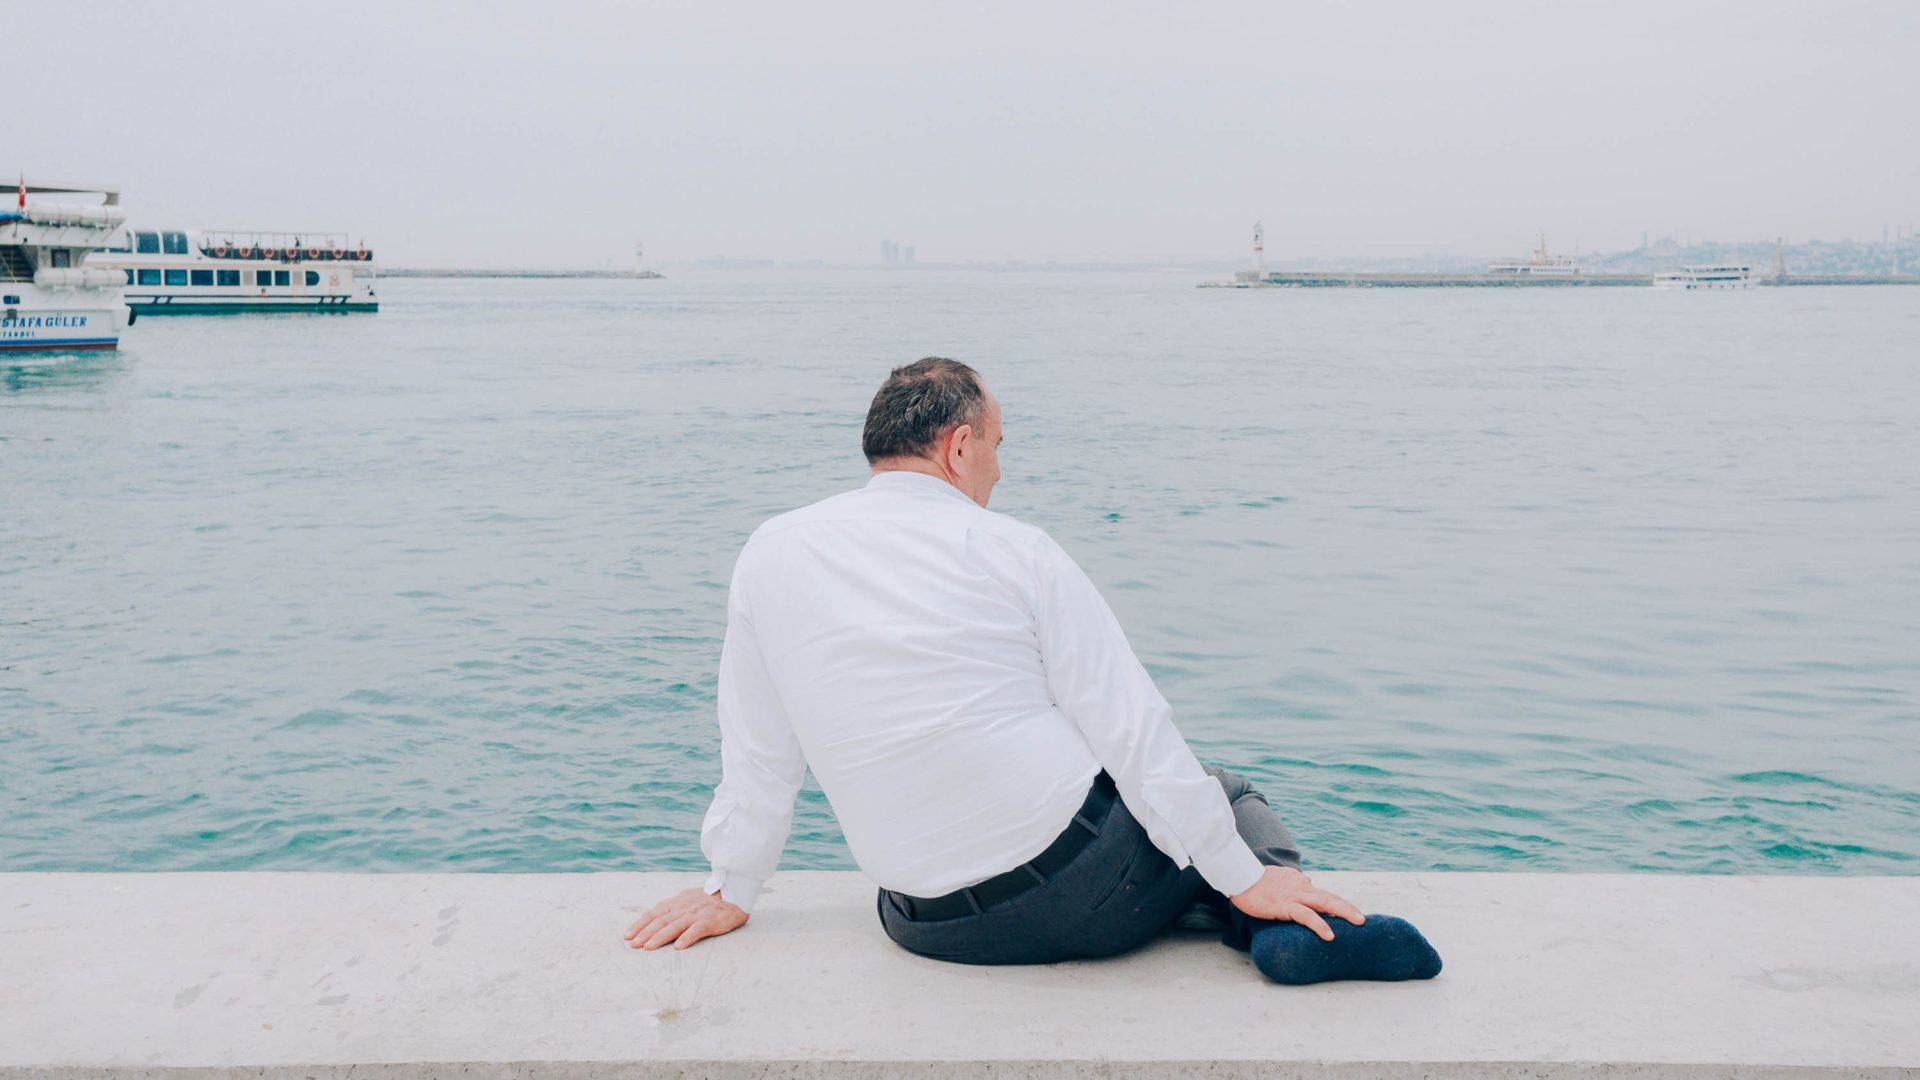 A man in a white shirt and black trousers looks out at the water.